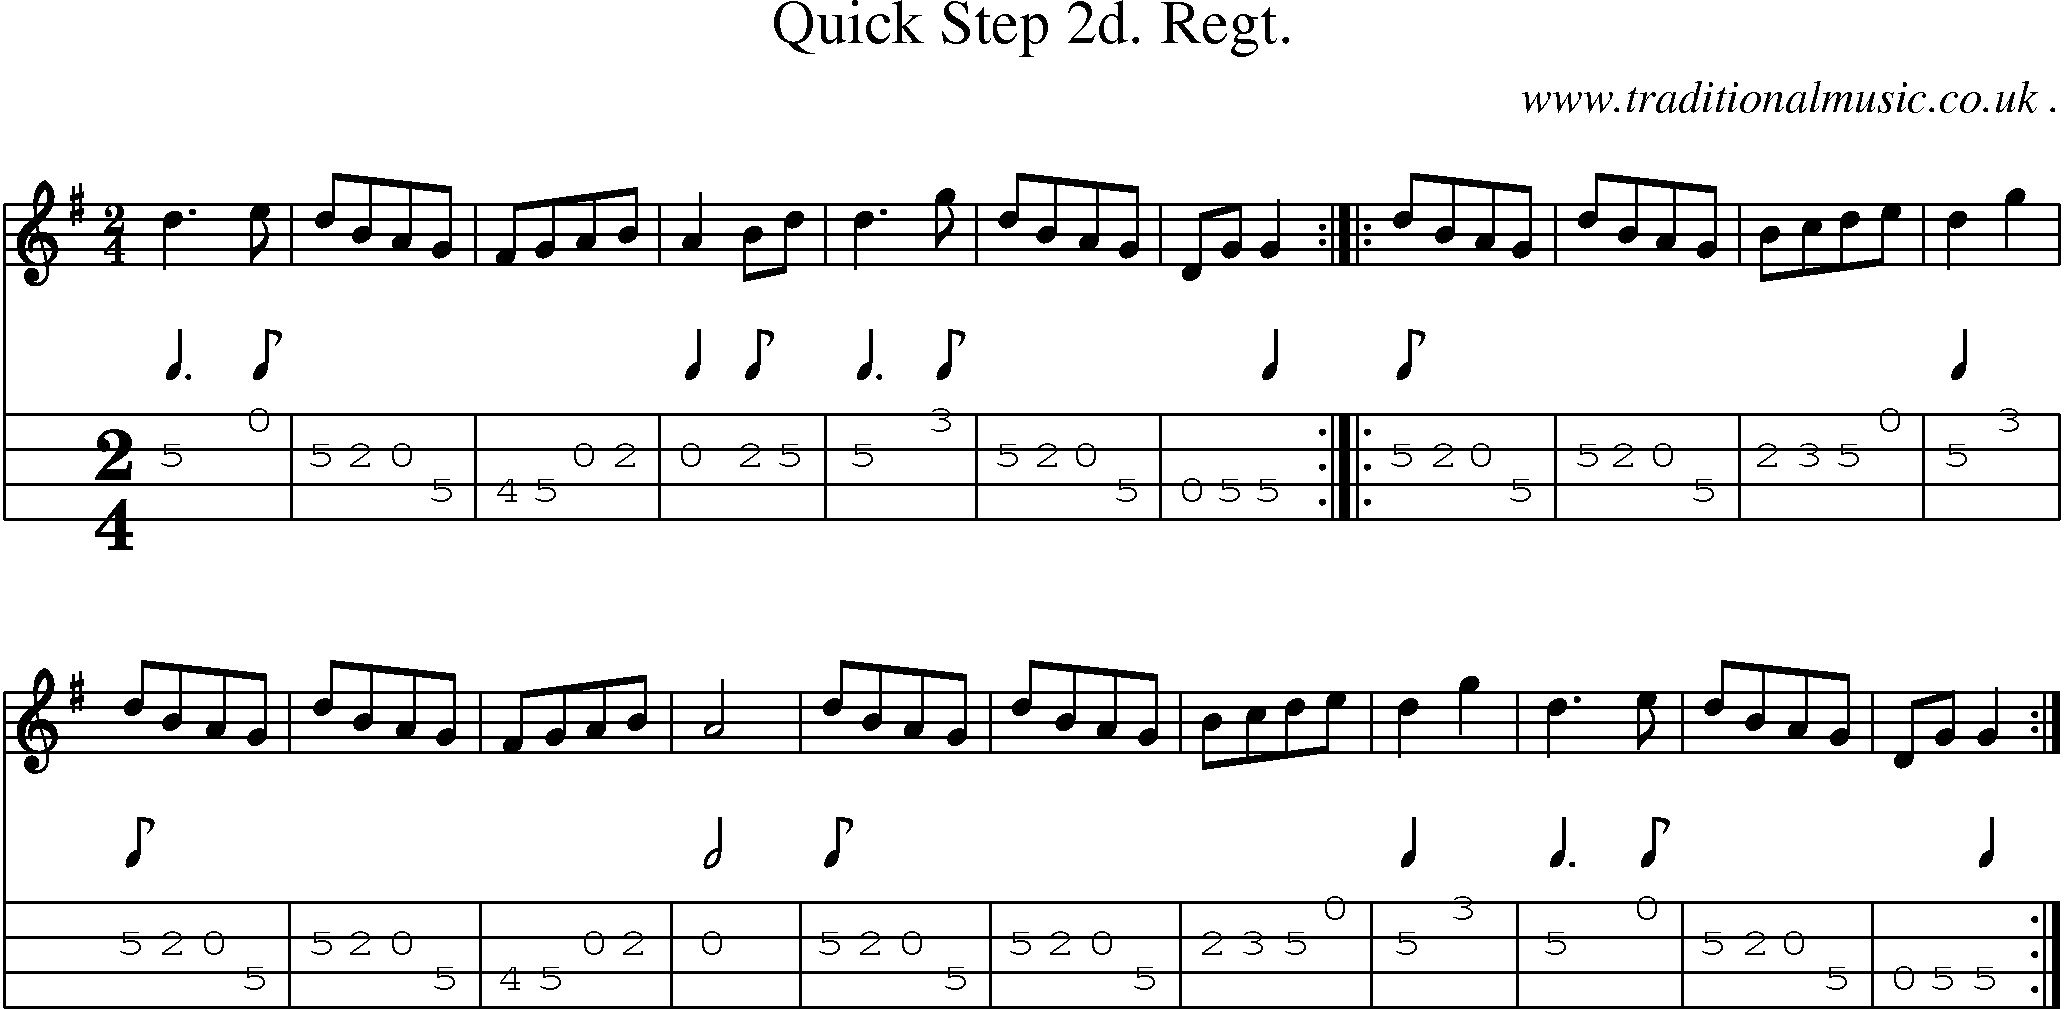 Sheet-Music and Mandolin Tabs for Quick Step 2d Regt